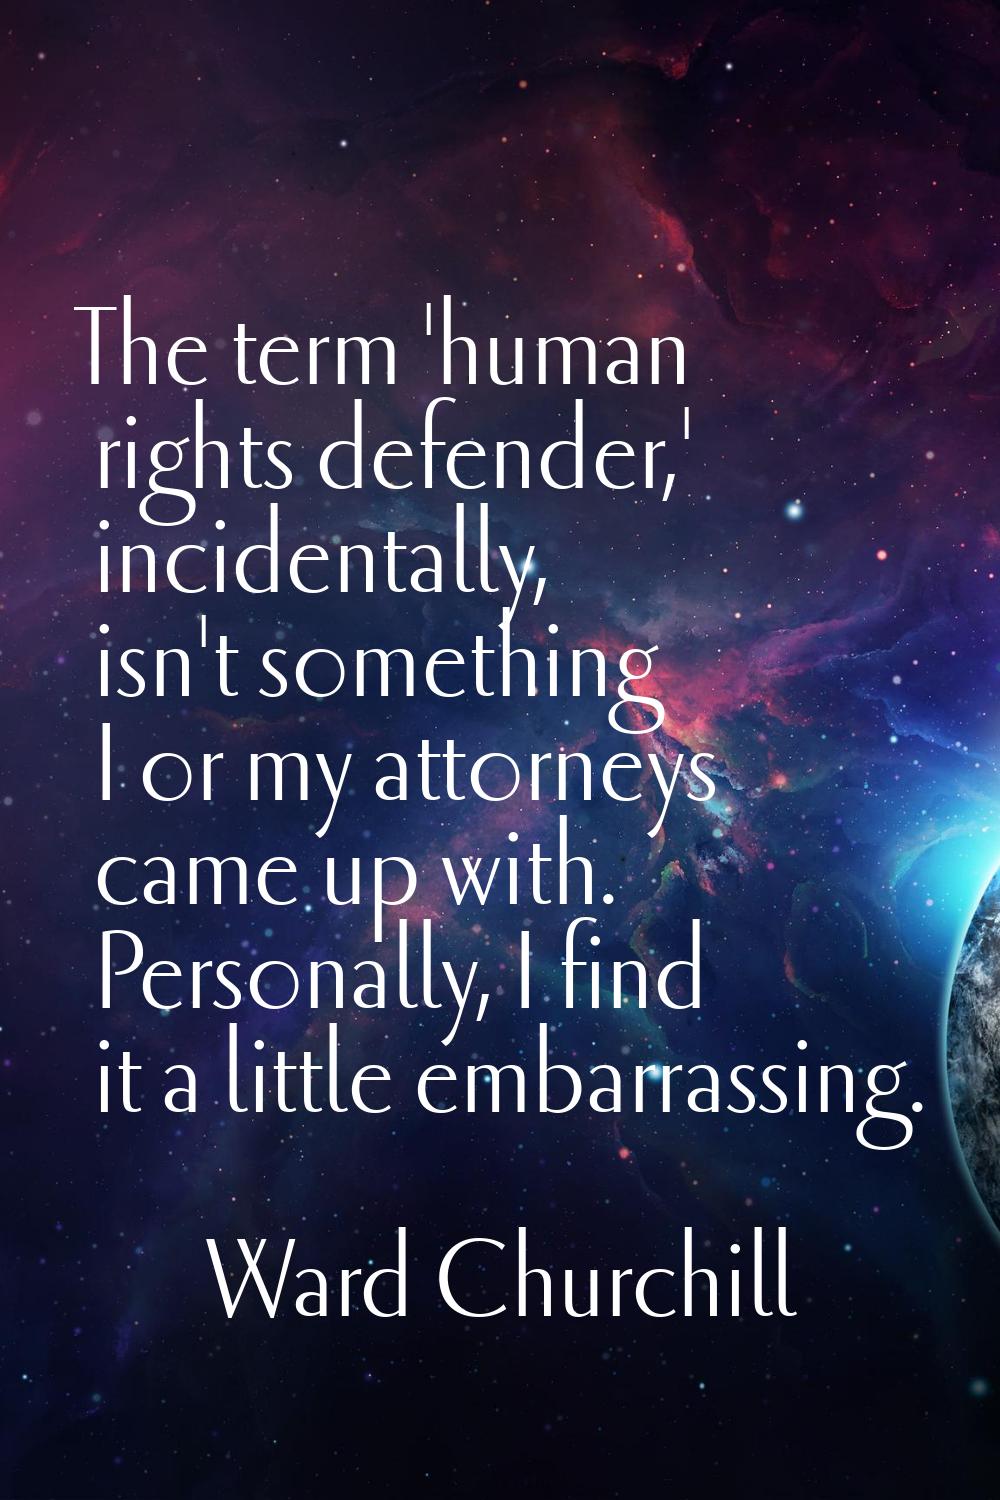 The term 'human rights defender,' incidentally, isn't something I or my attorneys came up with. Per